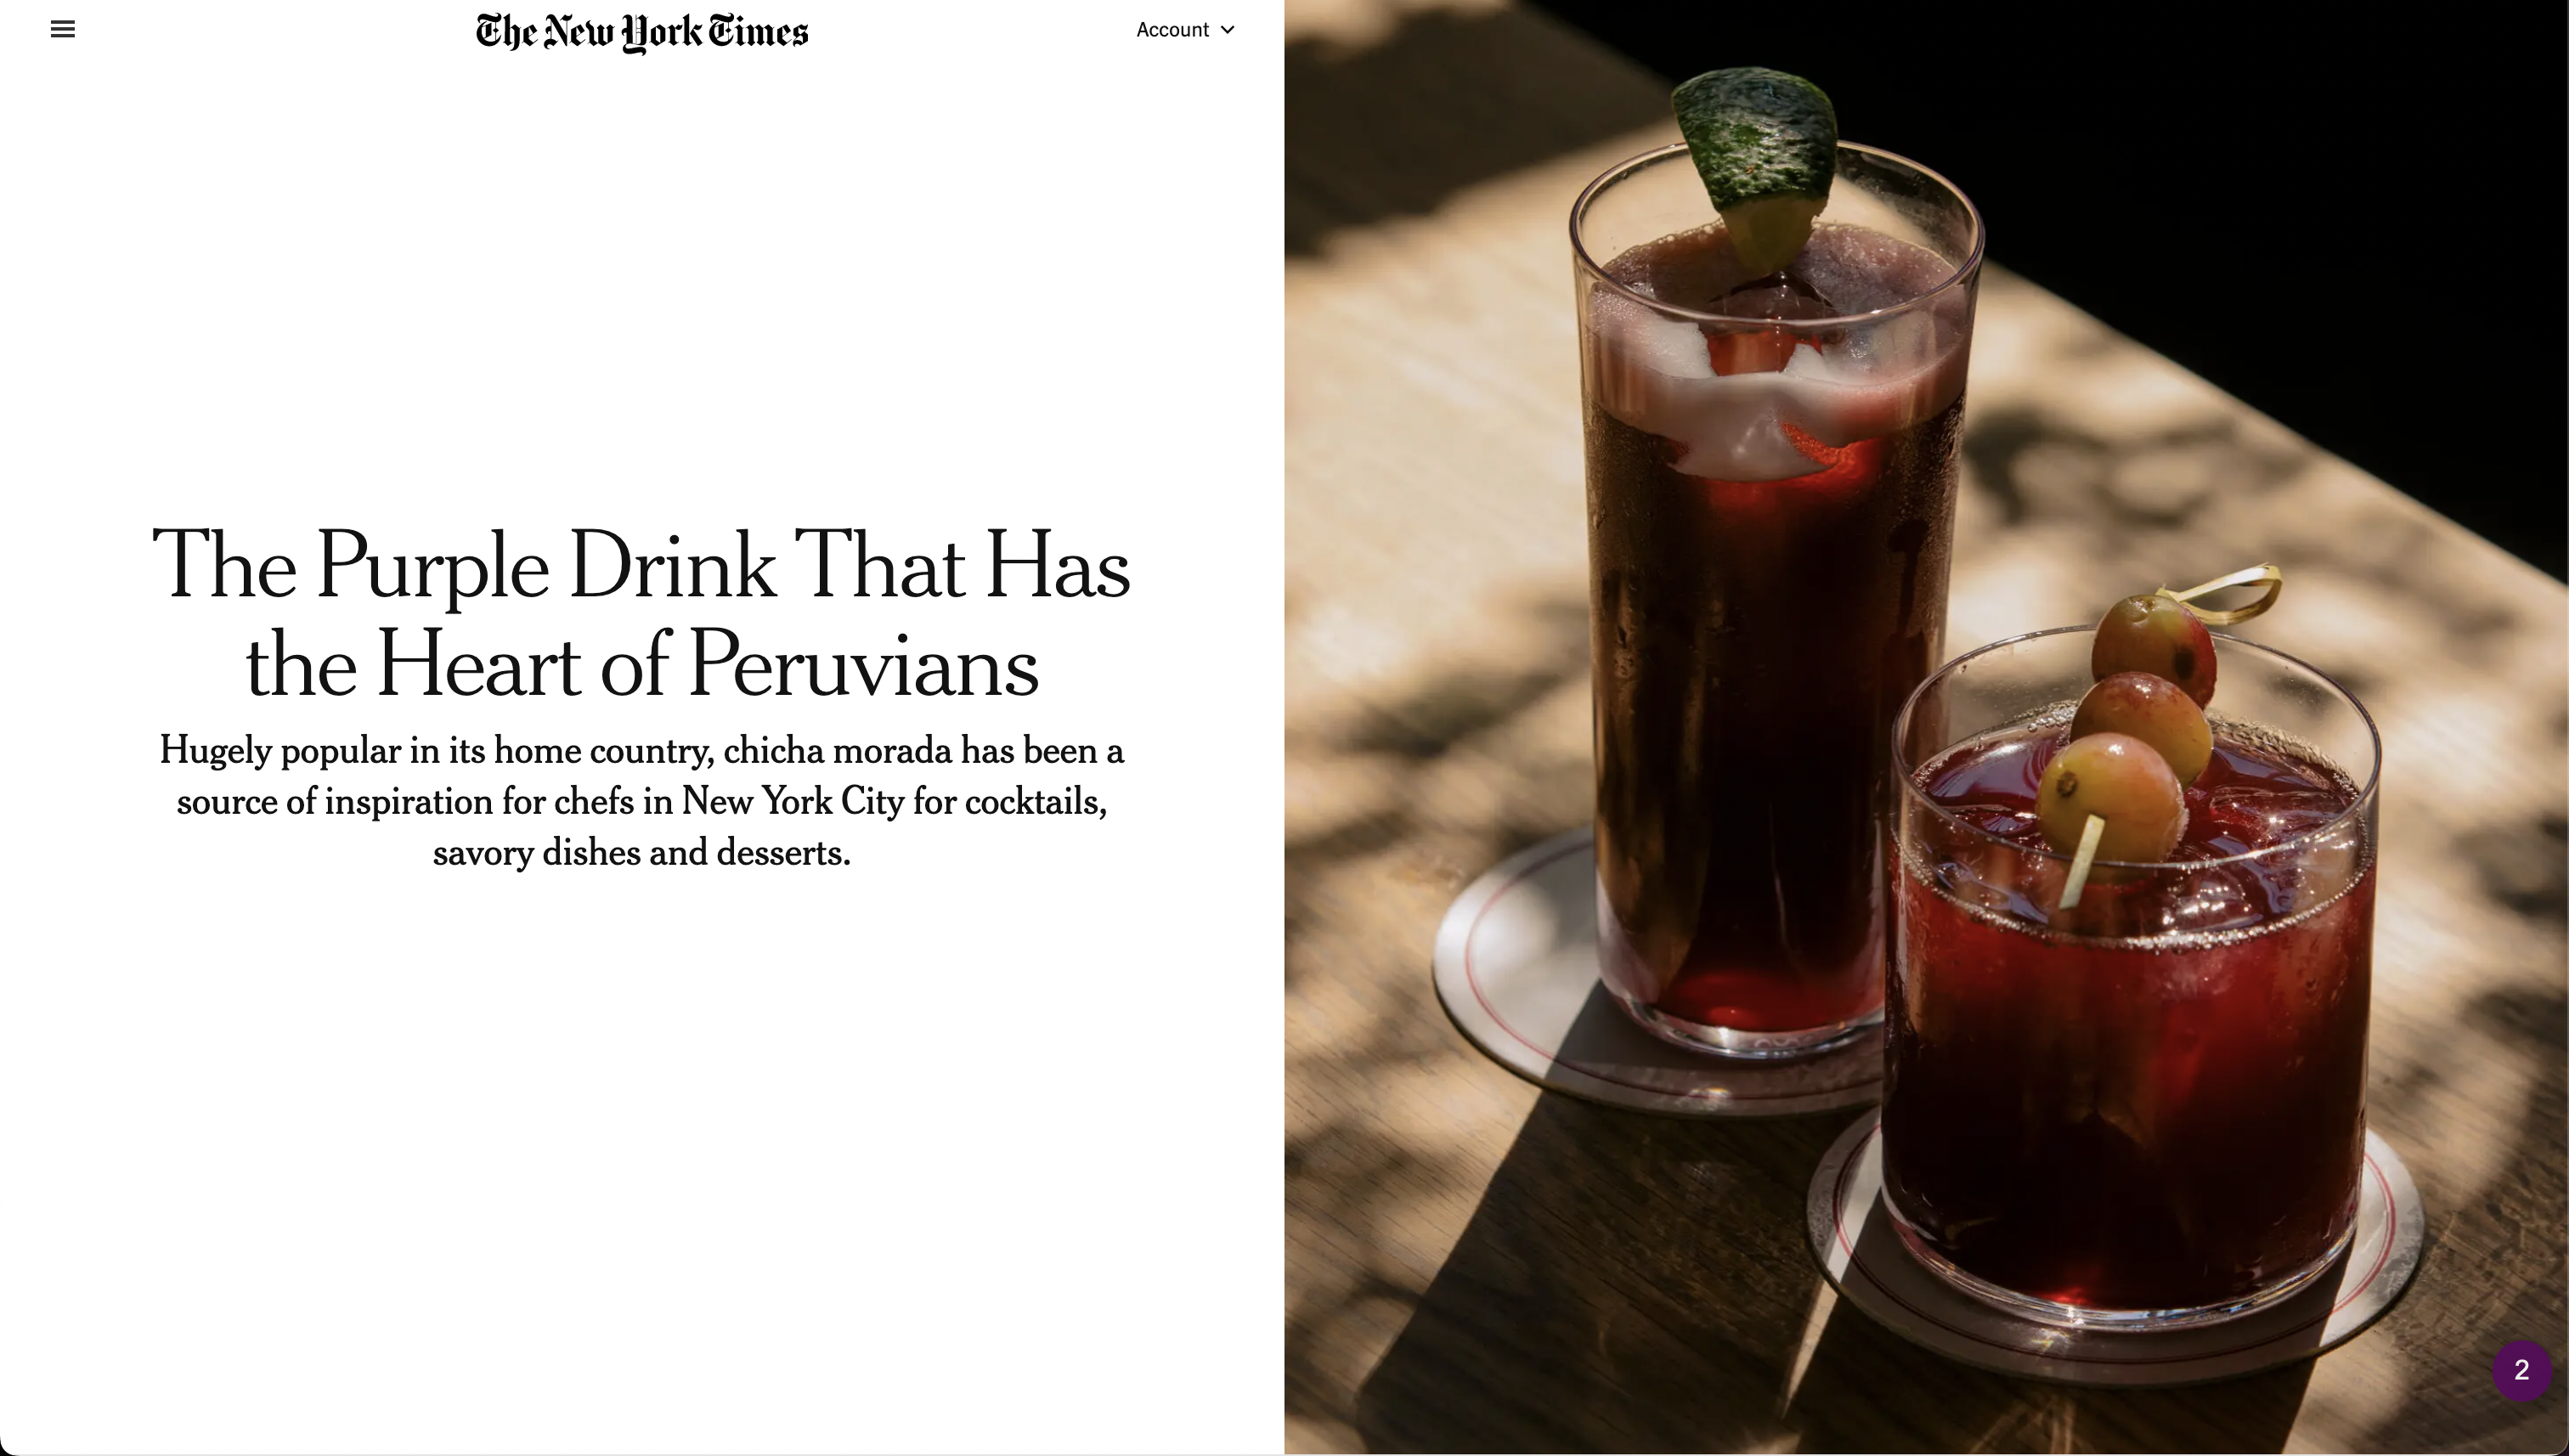 for The New York Times: The Purple Drink That Has the Heart of Peruvians